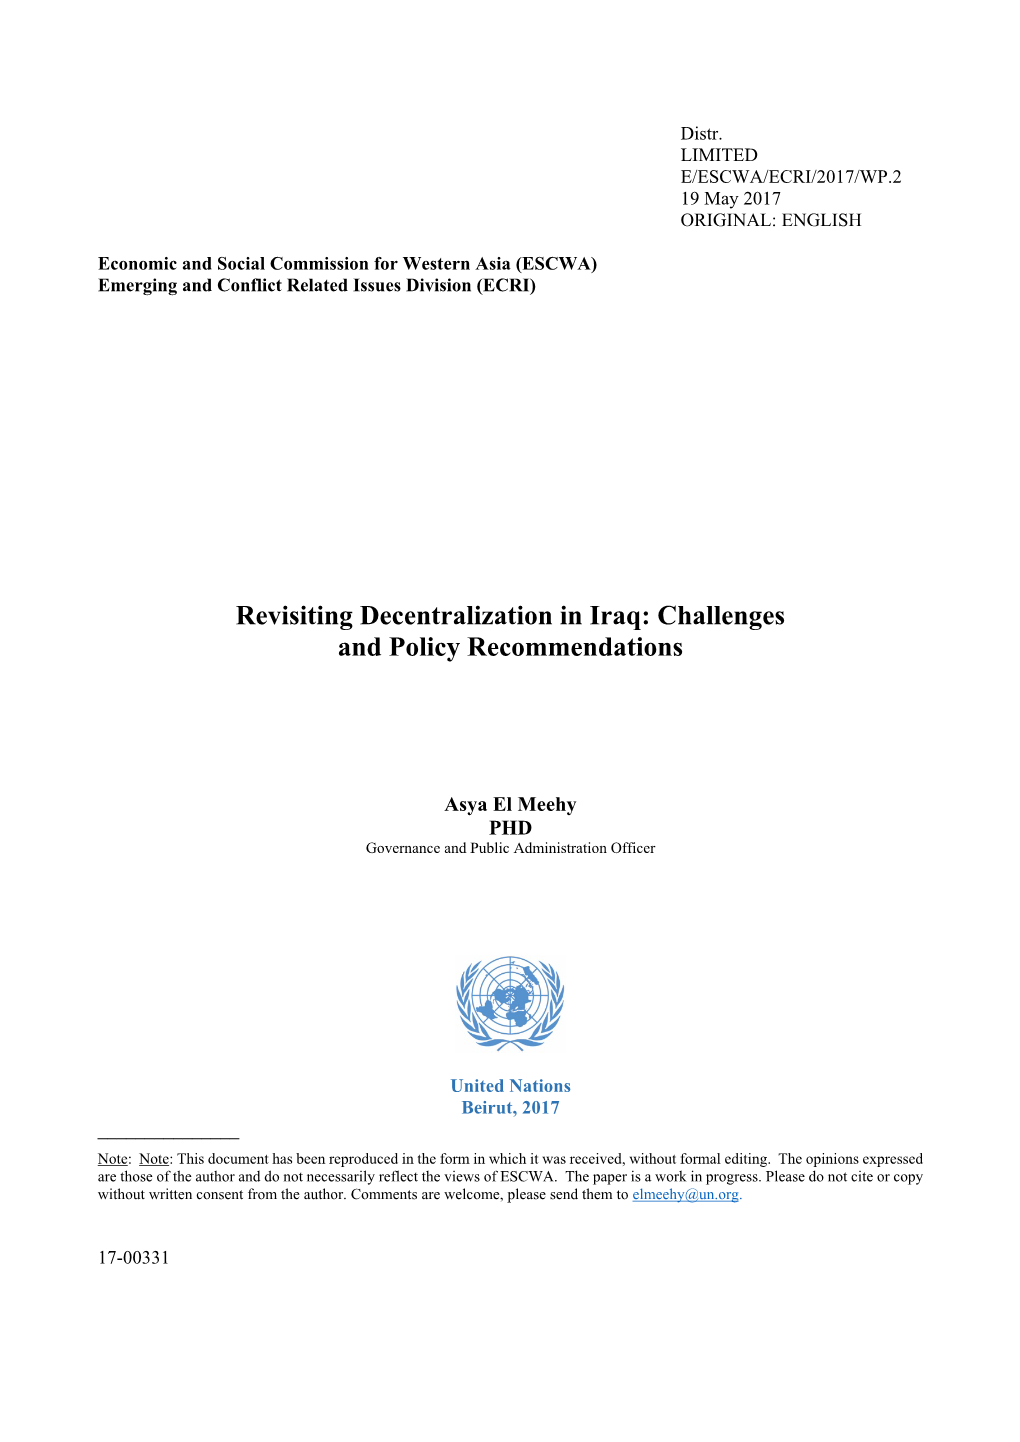 Revisiting Decentralization in Iraq: Challenges and Policy Recommendations